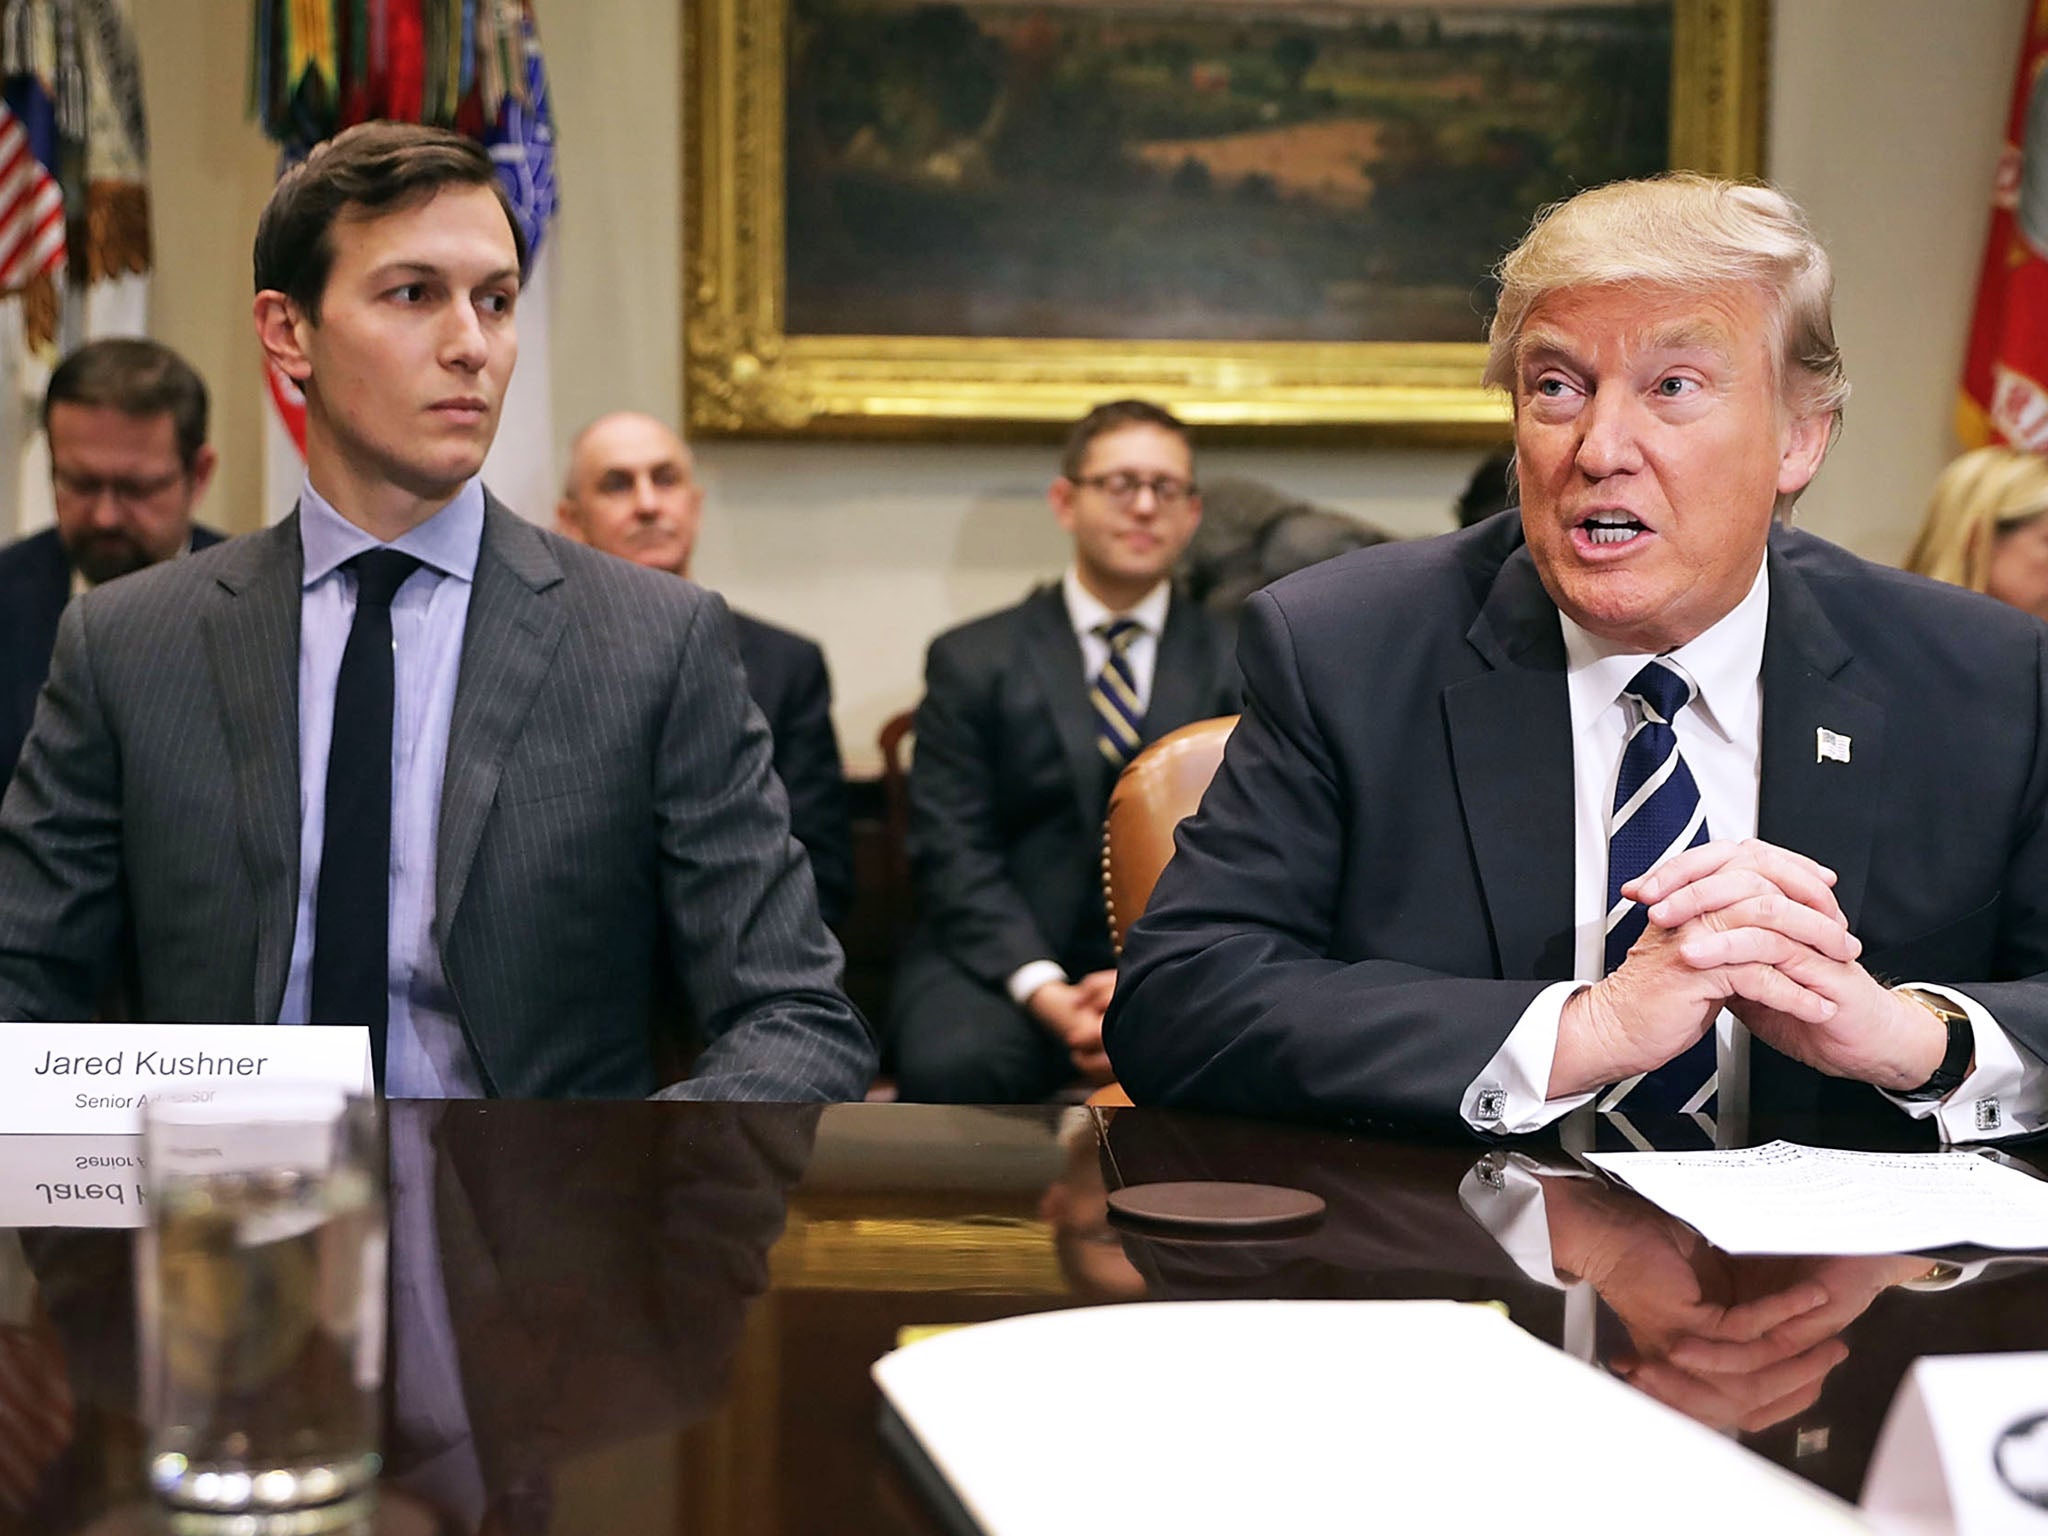 Jared Kushner, Trump’s son-in-law and Middle East envoy